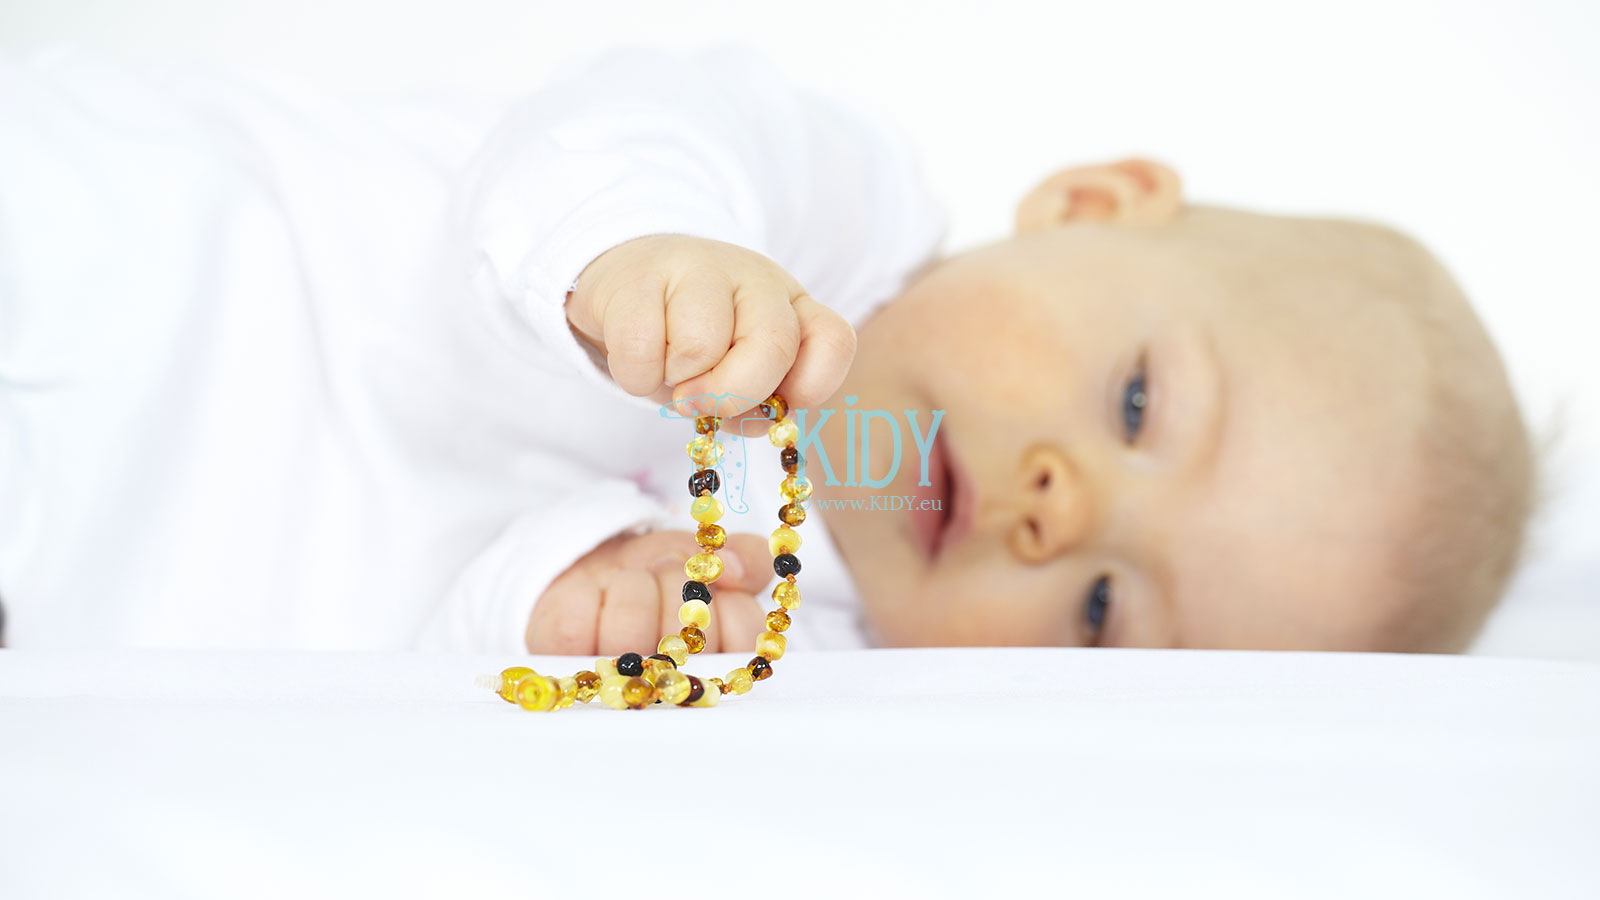 Amber teething necklace for babies – how does it work?